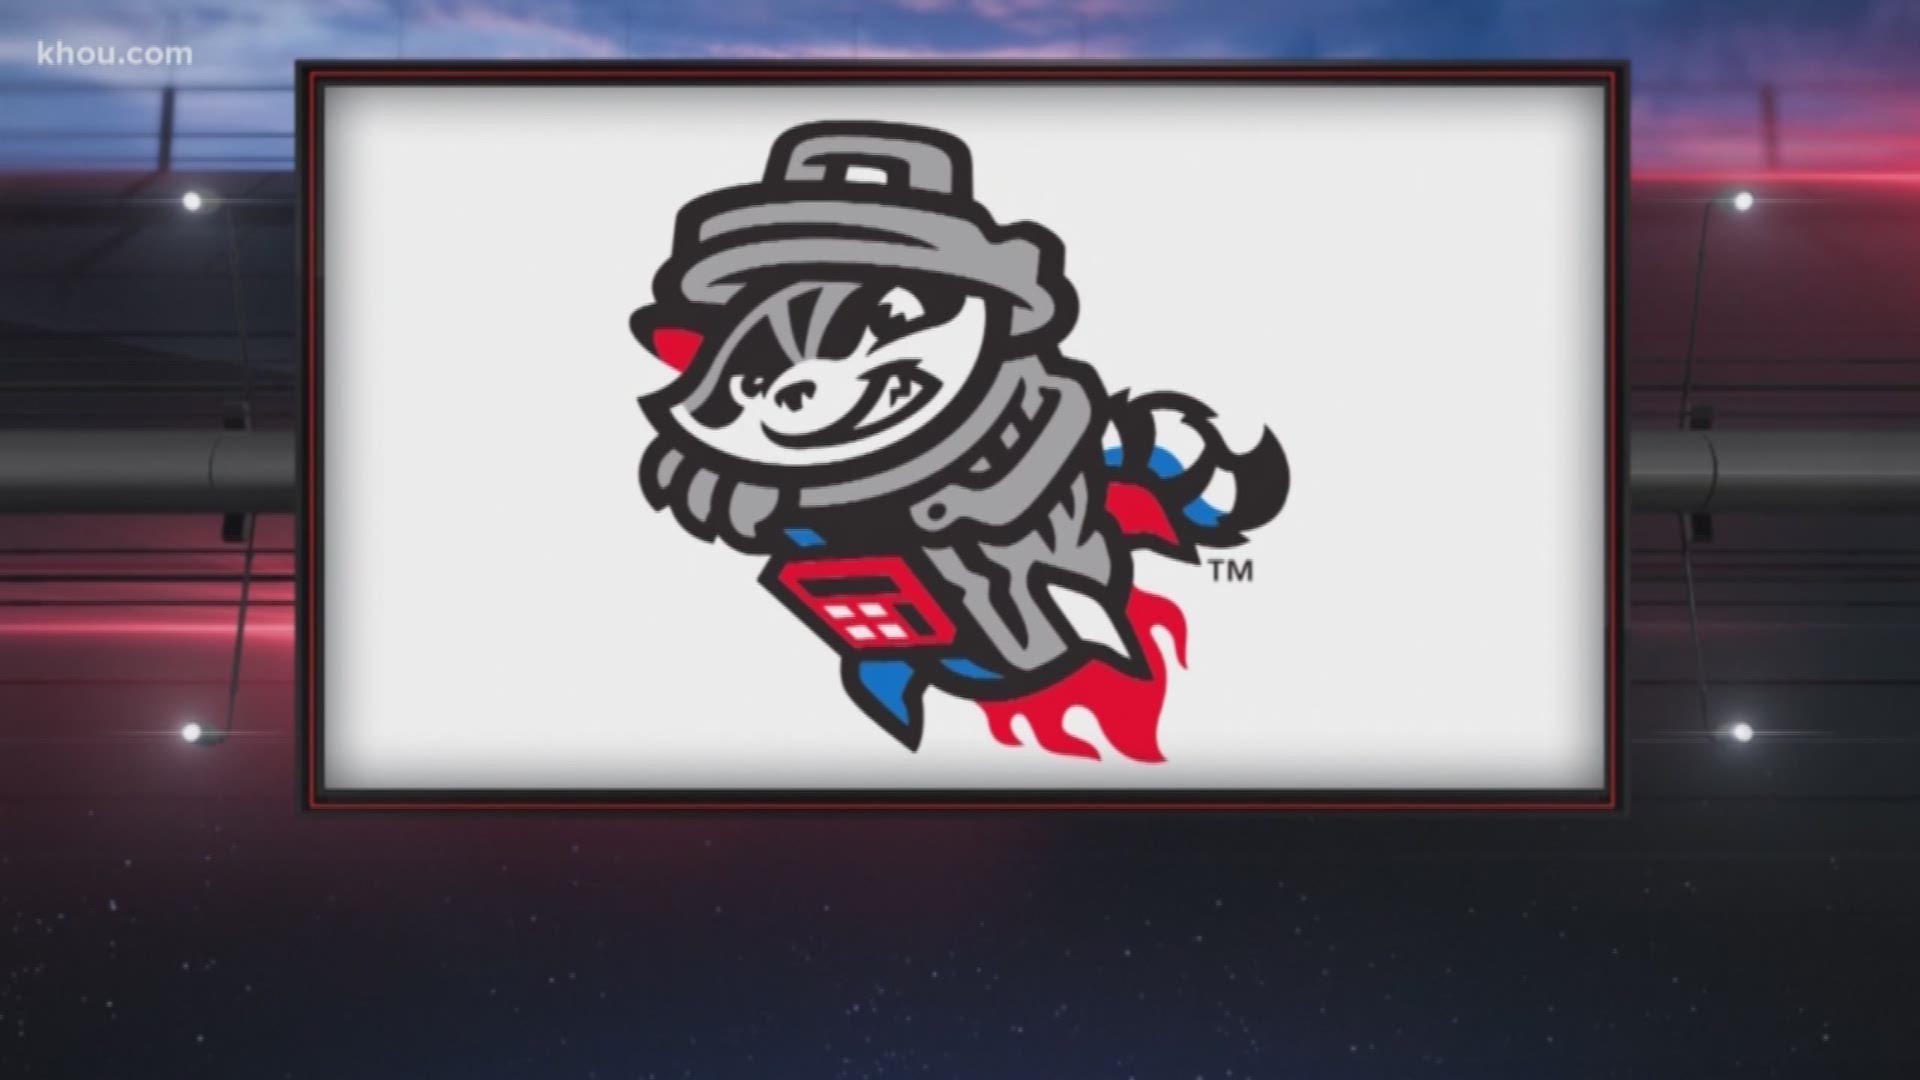 The newest team in professional baseball is from the Huntsville, Alabama area. They're calling themselves the Rocket City Trash Pandas. Tell us, what's your favorite minor league team nickname?